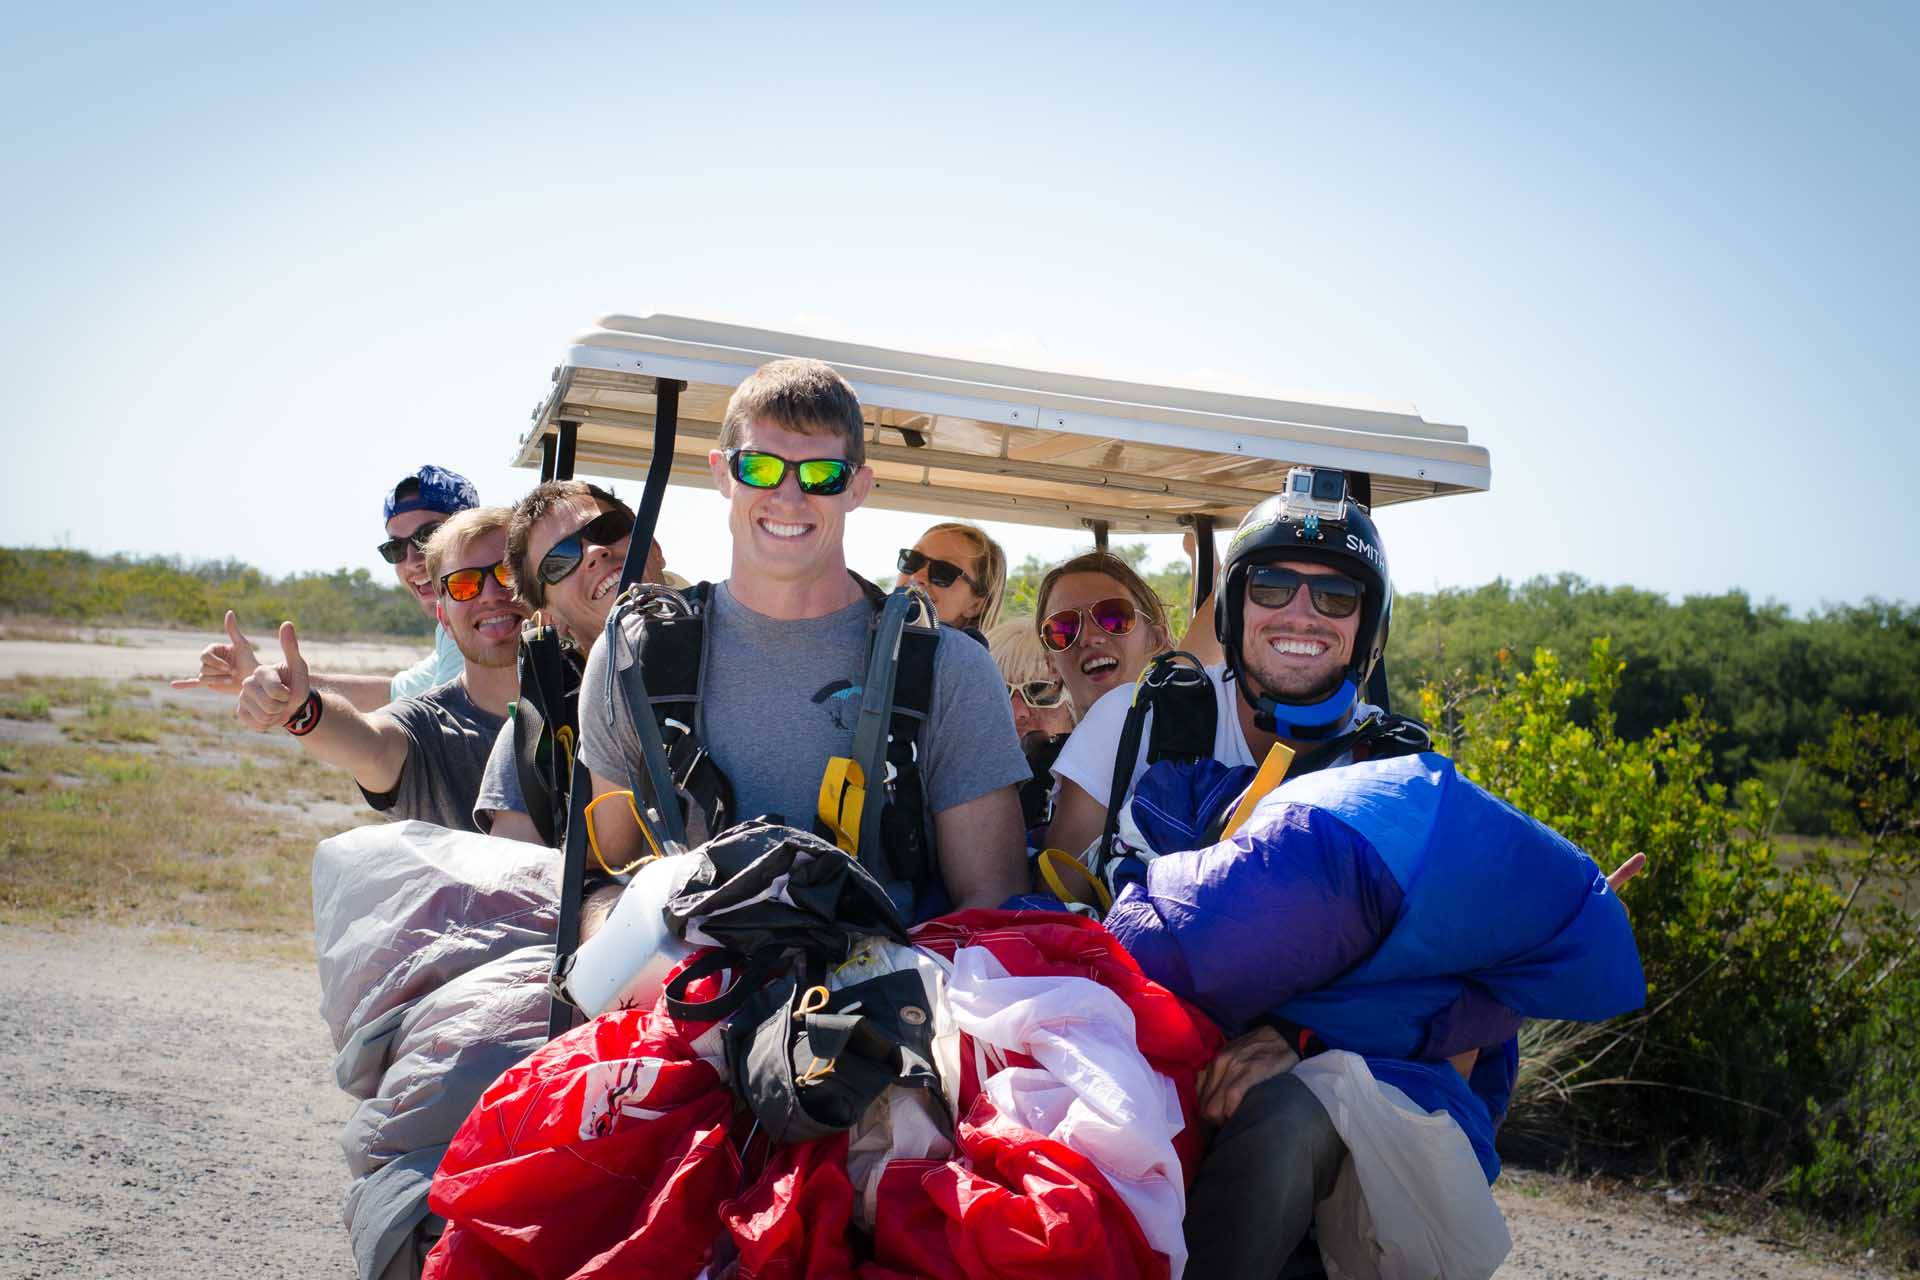 Group of skydivers riding in a golf cart at Skydive Key West 